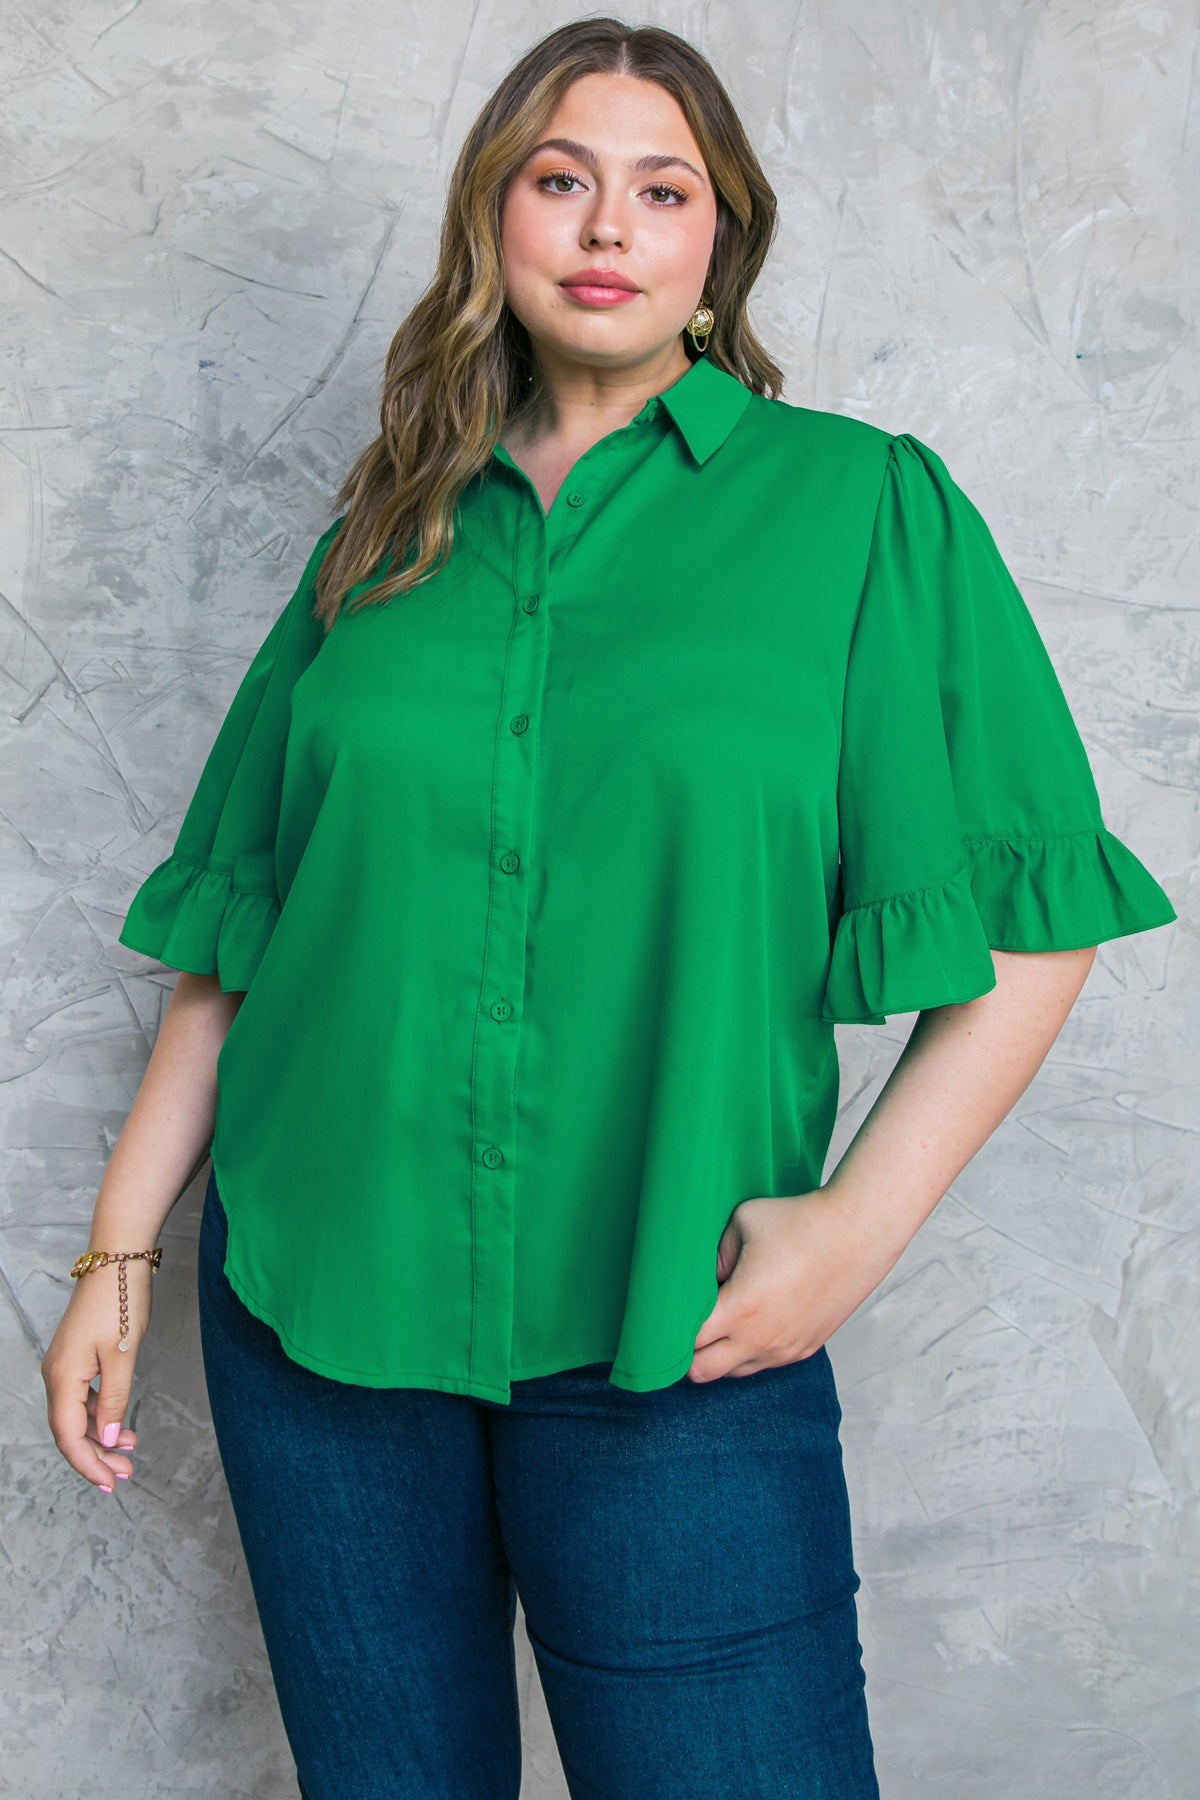 Back to Business Top | Nursing Friendly